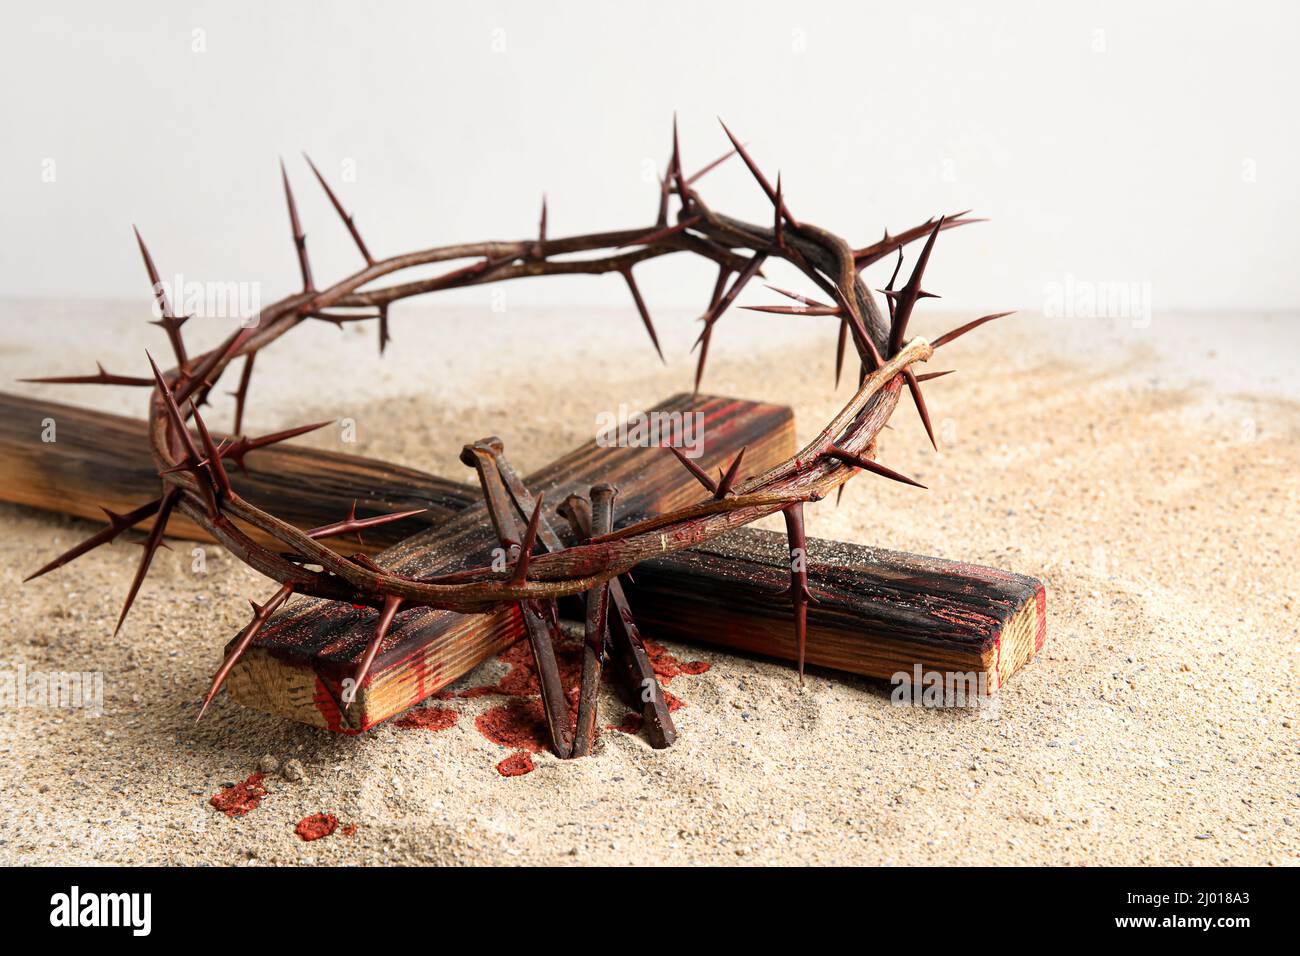 Premium Photo | Crown of thorns and nails symbols of the christian  crucifixion in easter